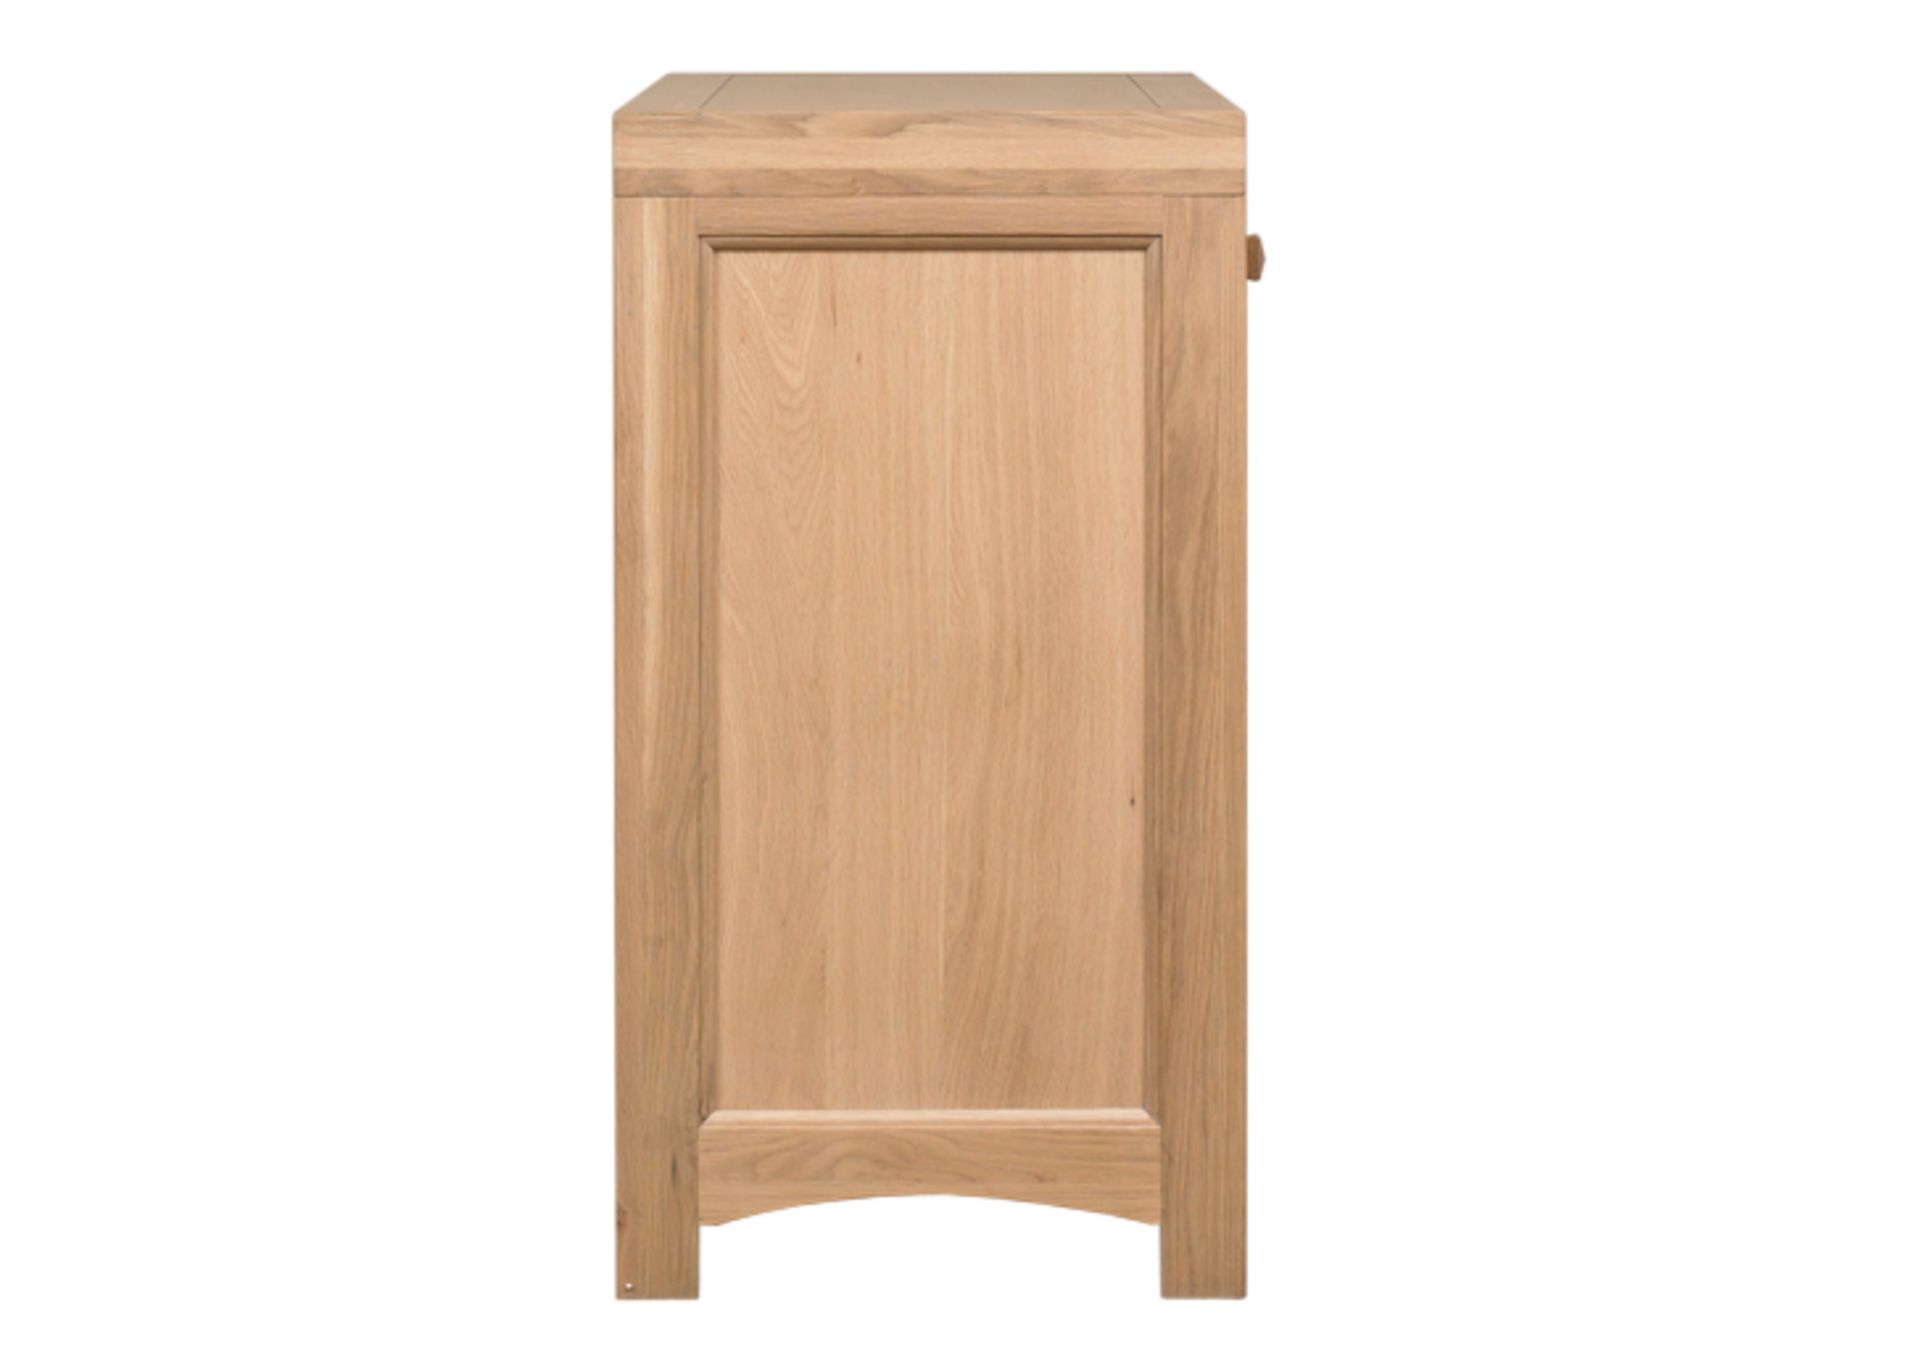 1 x Mark Webster Buckingham Small Sideboad - Two Door/Two Drawer - White Wash Oak With a Timeless - Image 4 of 4